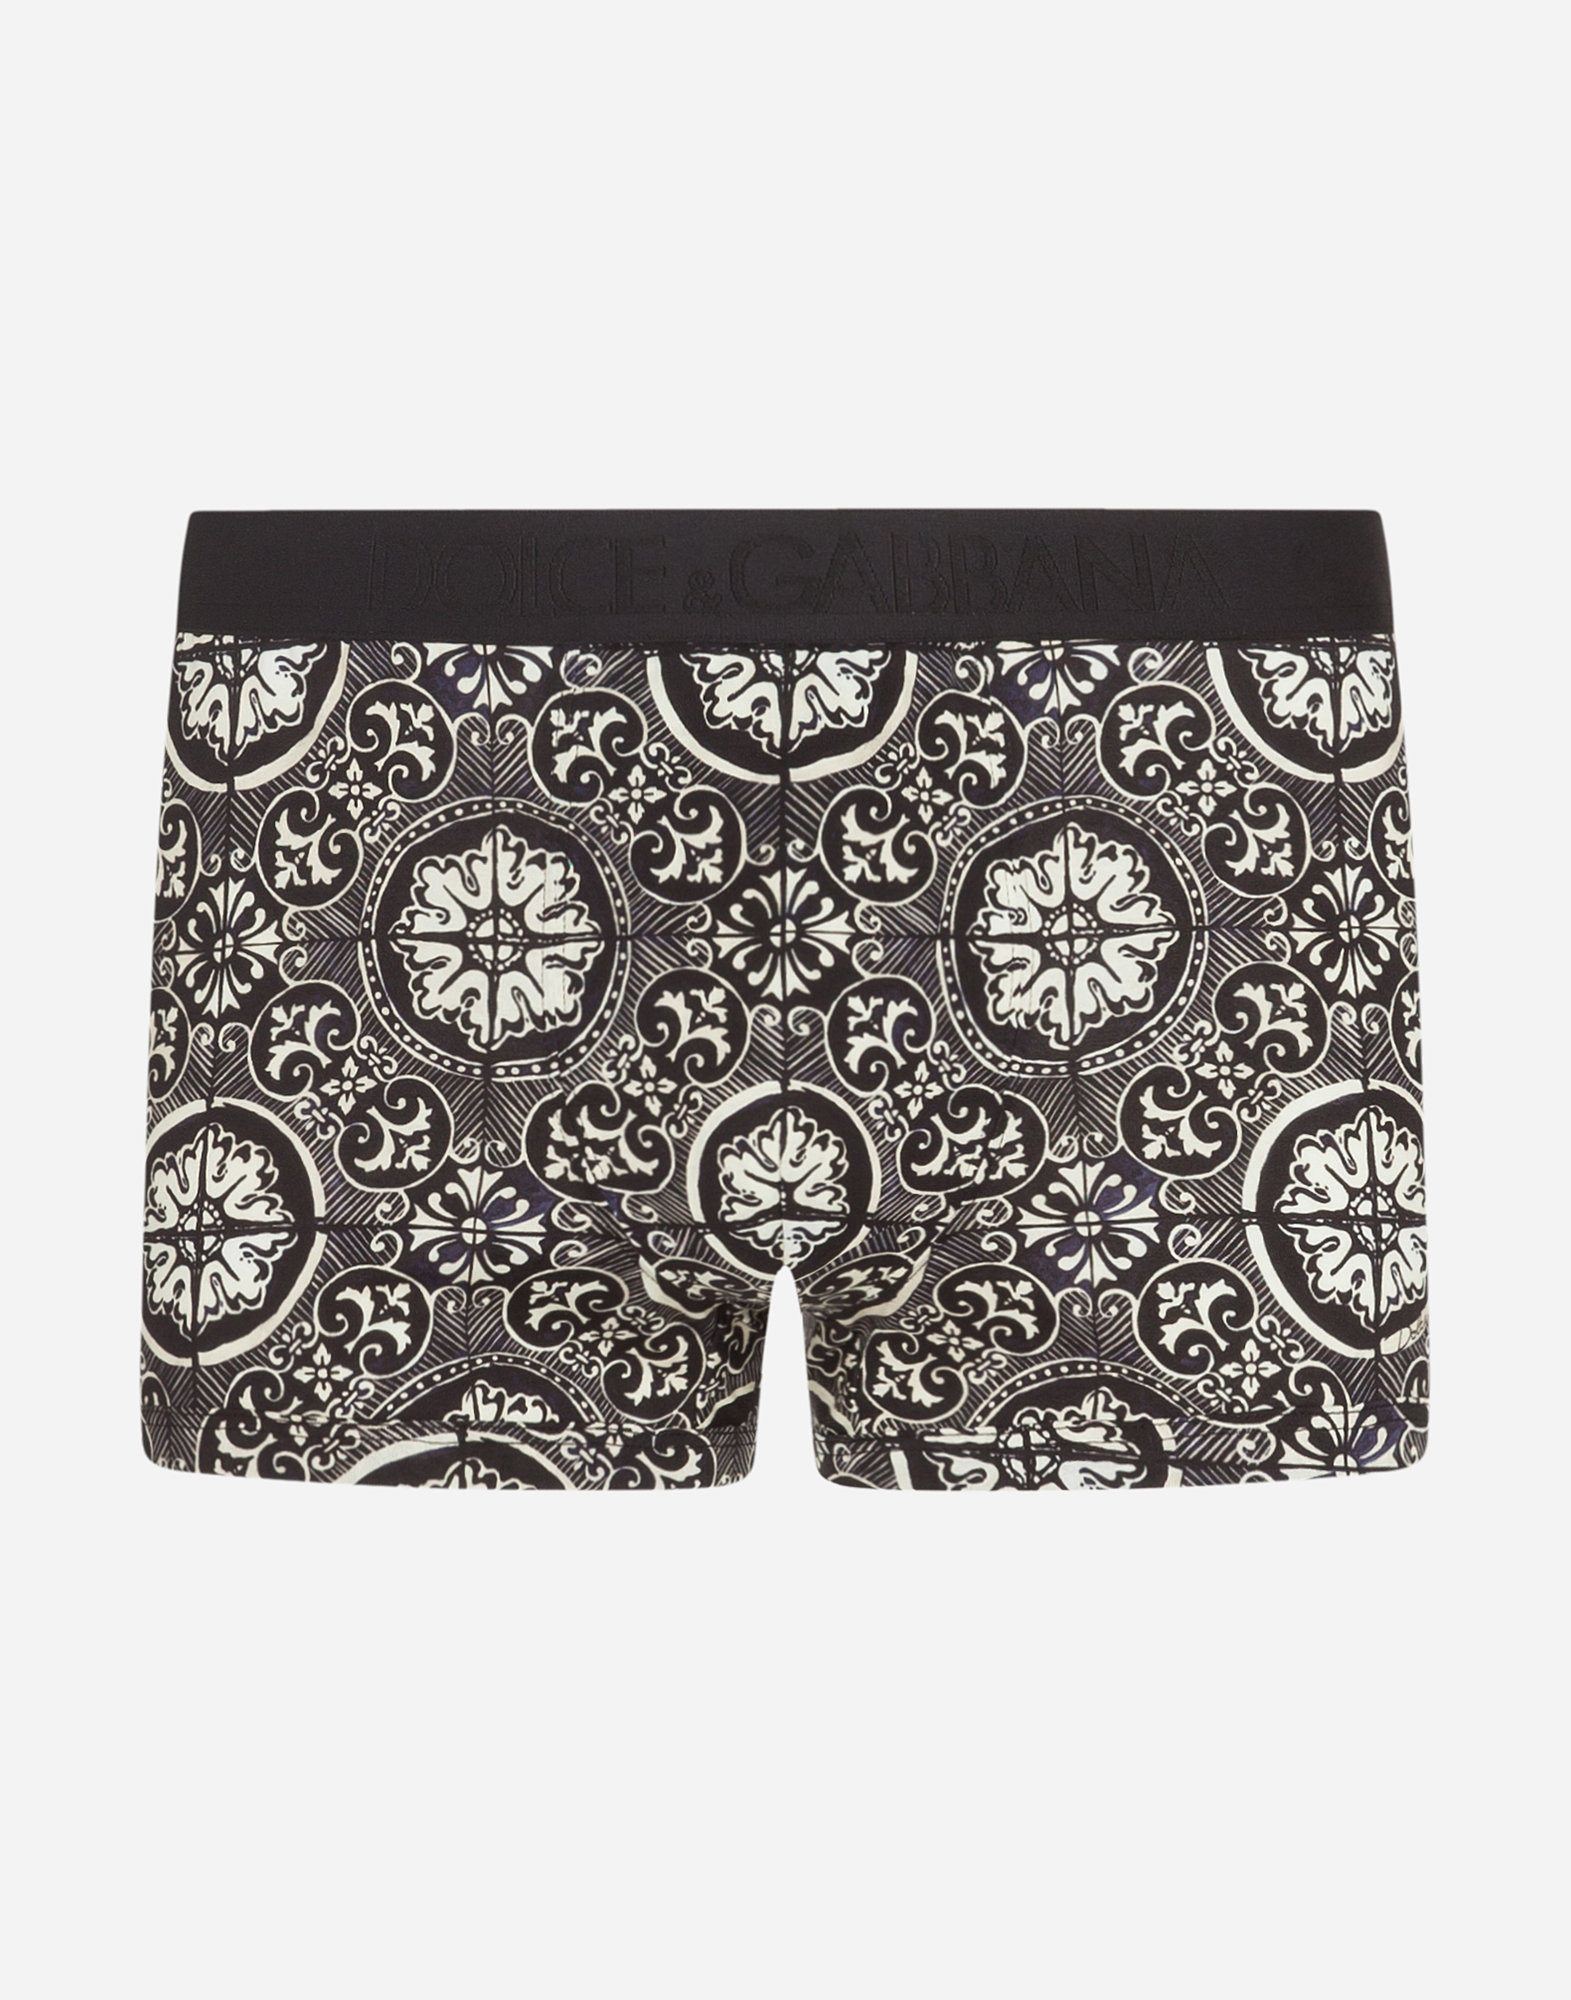 DOLCE & GABBANA COTTON BOXERS WITH MAIOLICA PRINT ON A BLACK BACKGROUND